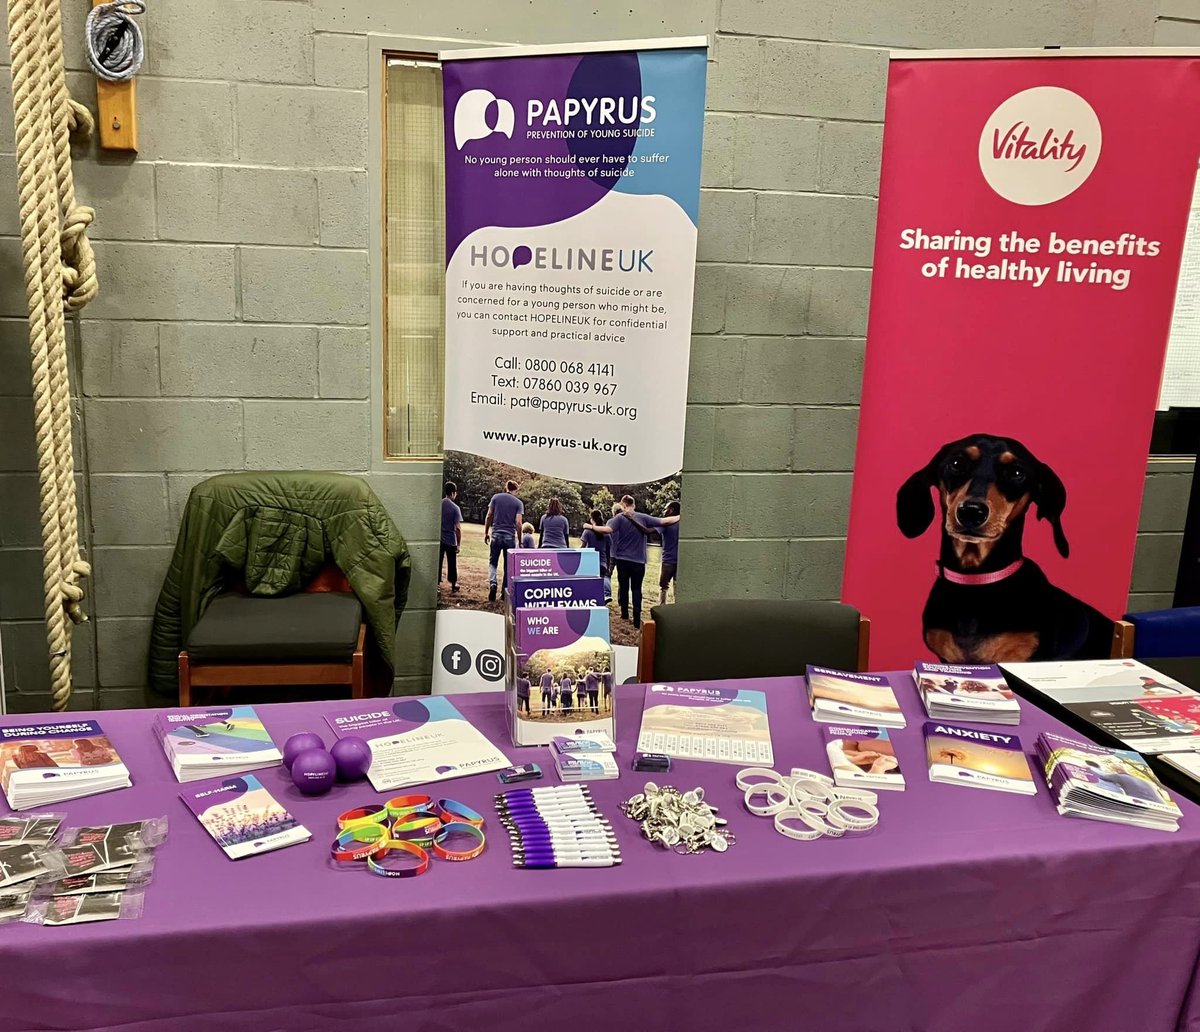 Today we attended the Health Fair for 5 Regt Royal Artillery in Marne Barracks, Catterick, North Yorkshire. We've had lots of conversations with serving personnel about mental health struggles, and how hard it can be to open up or talk. 💜

#SuicidePrevention #WeArePAPYRUS